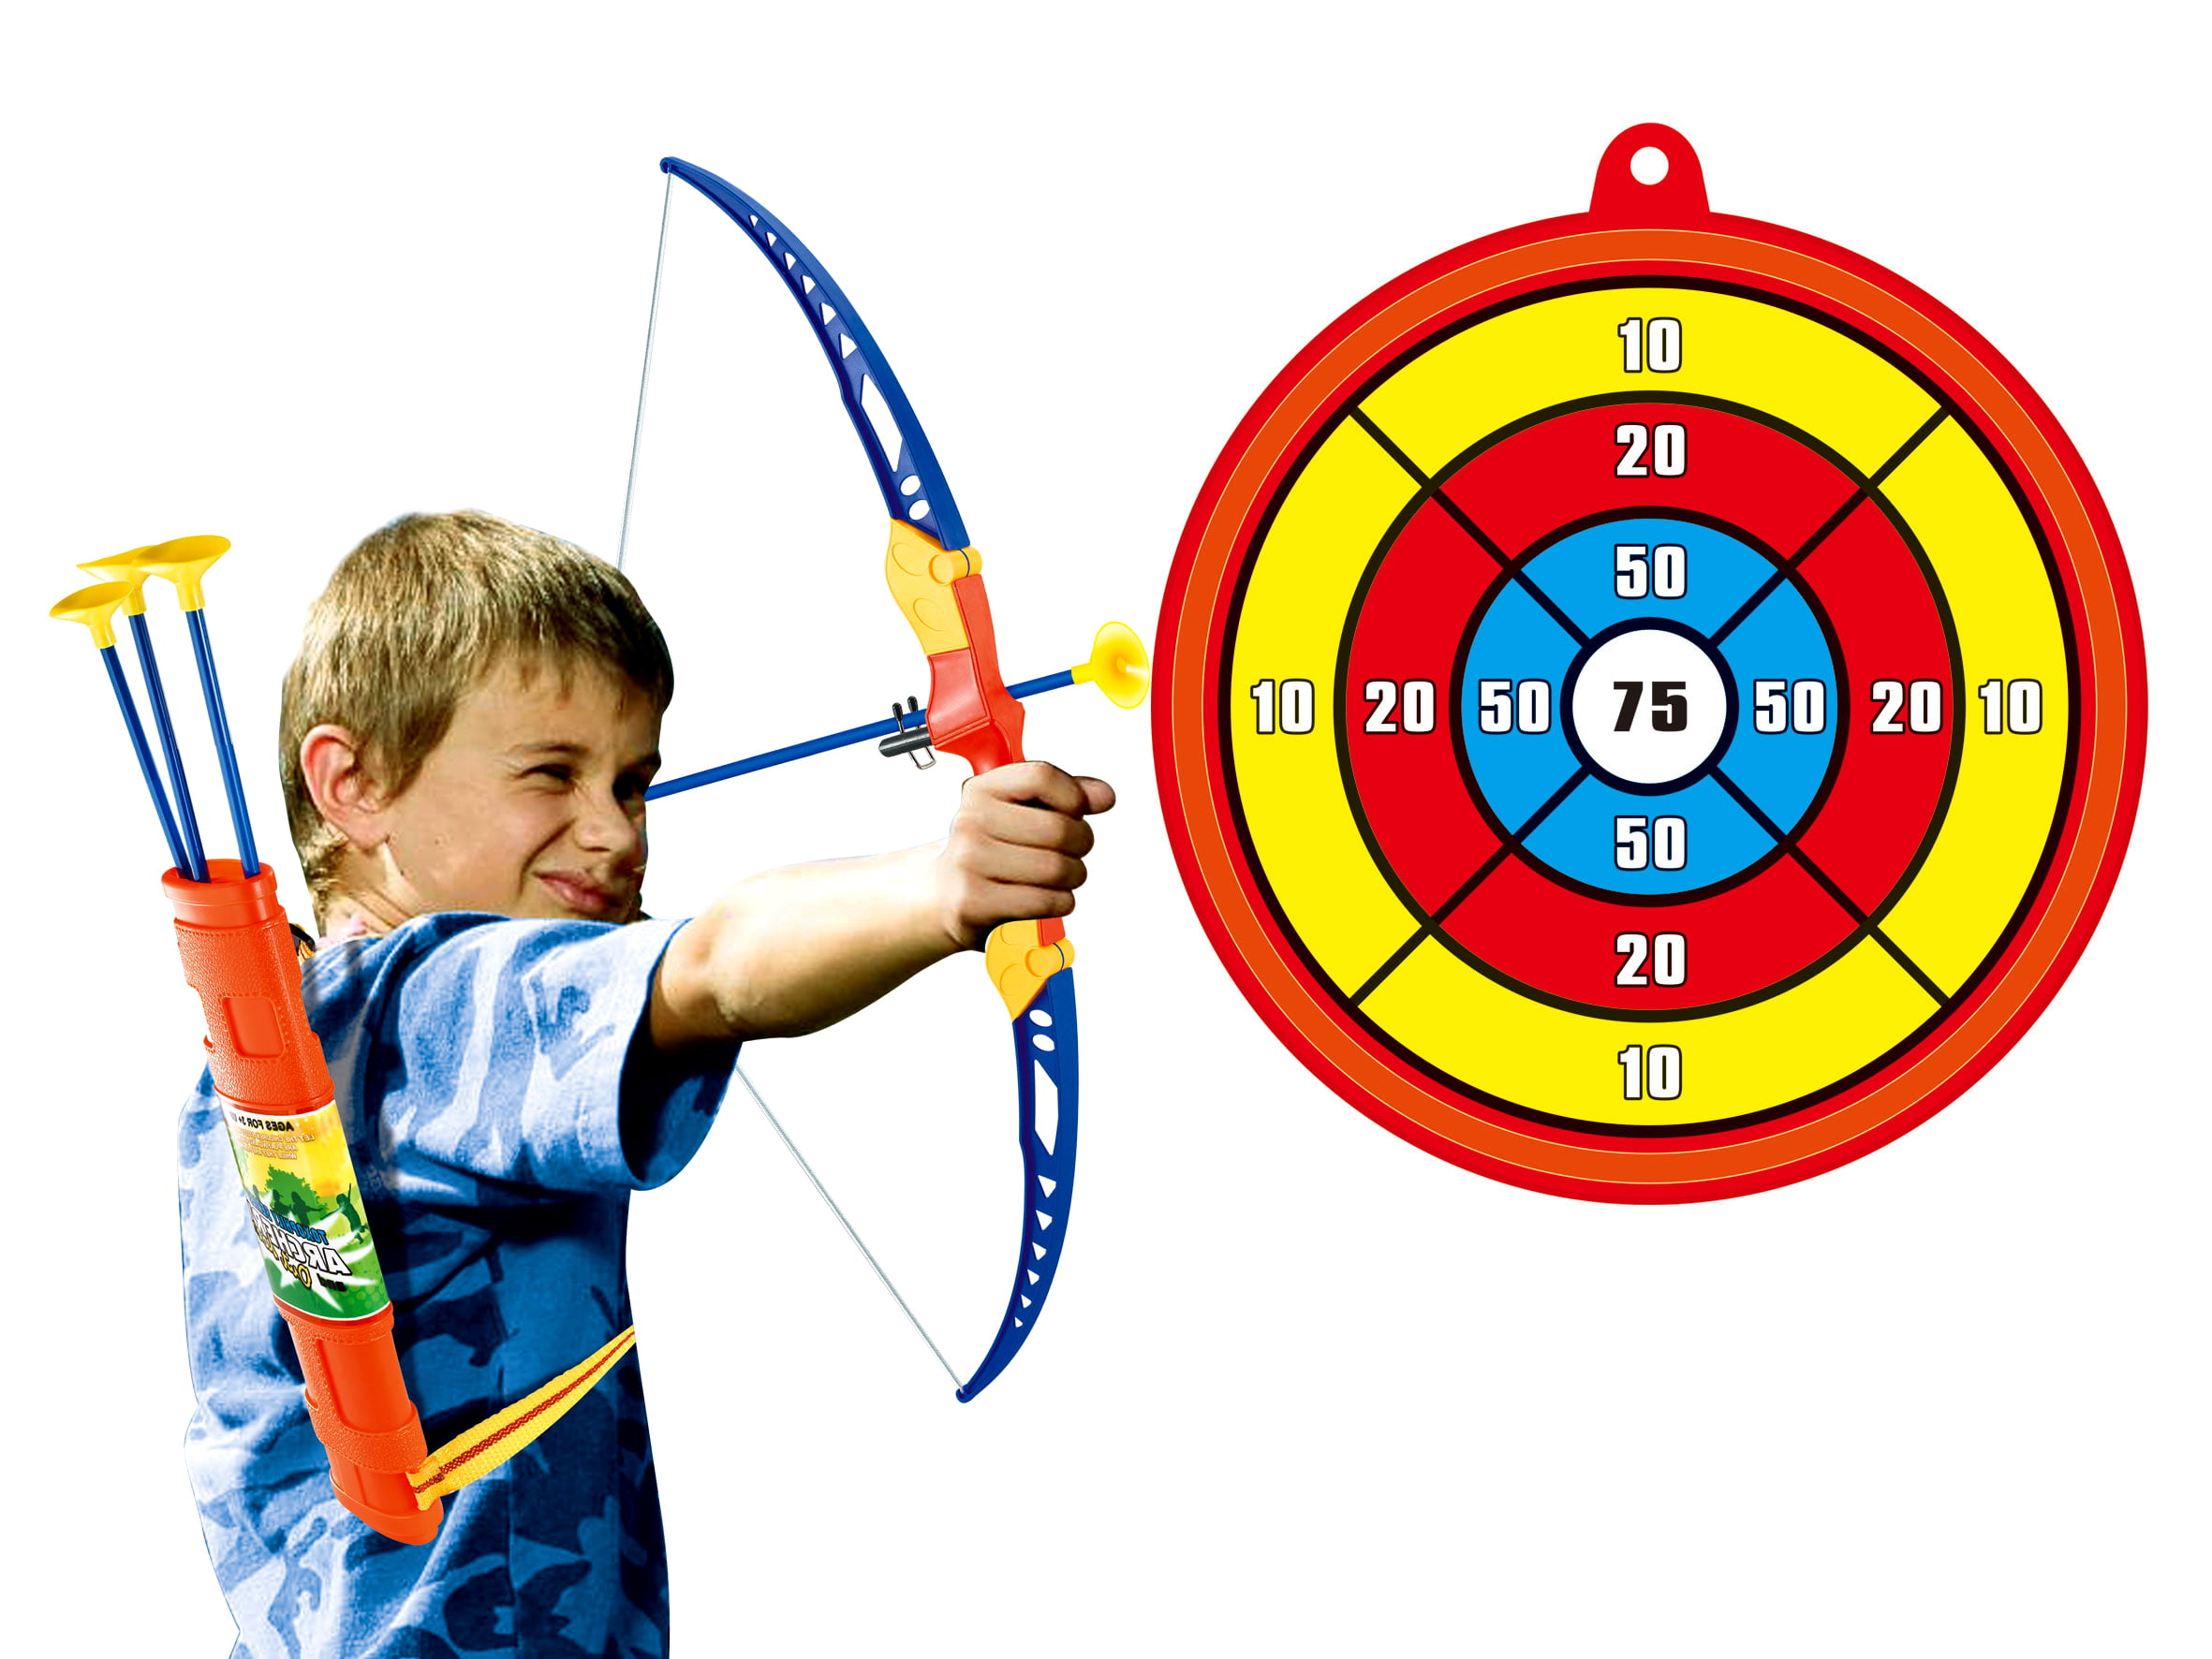 Kids Archery Bow And Arrow Toy Set With Target PS951C NERF Blaster Toy